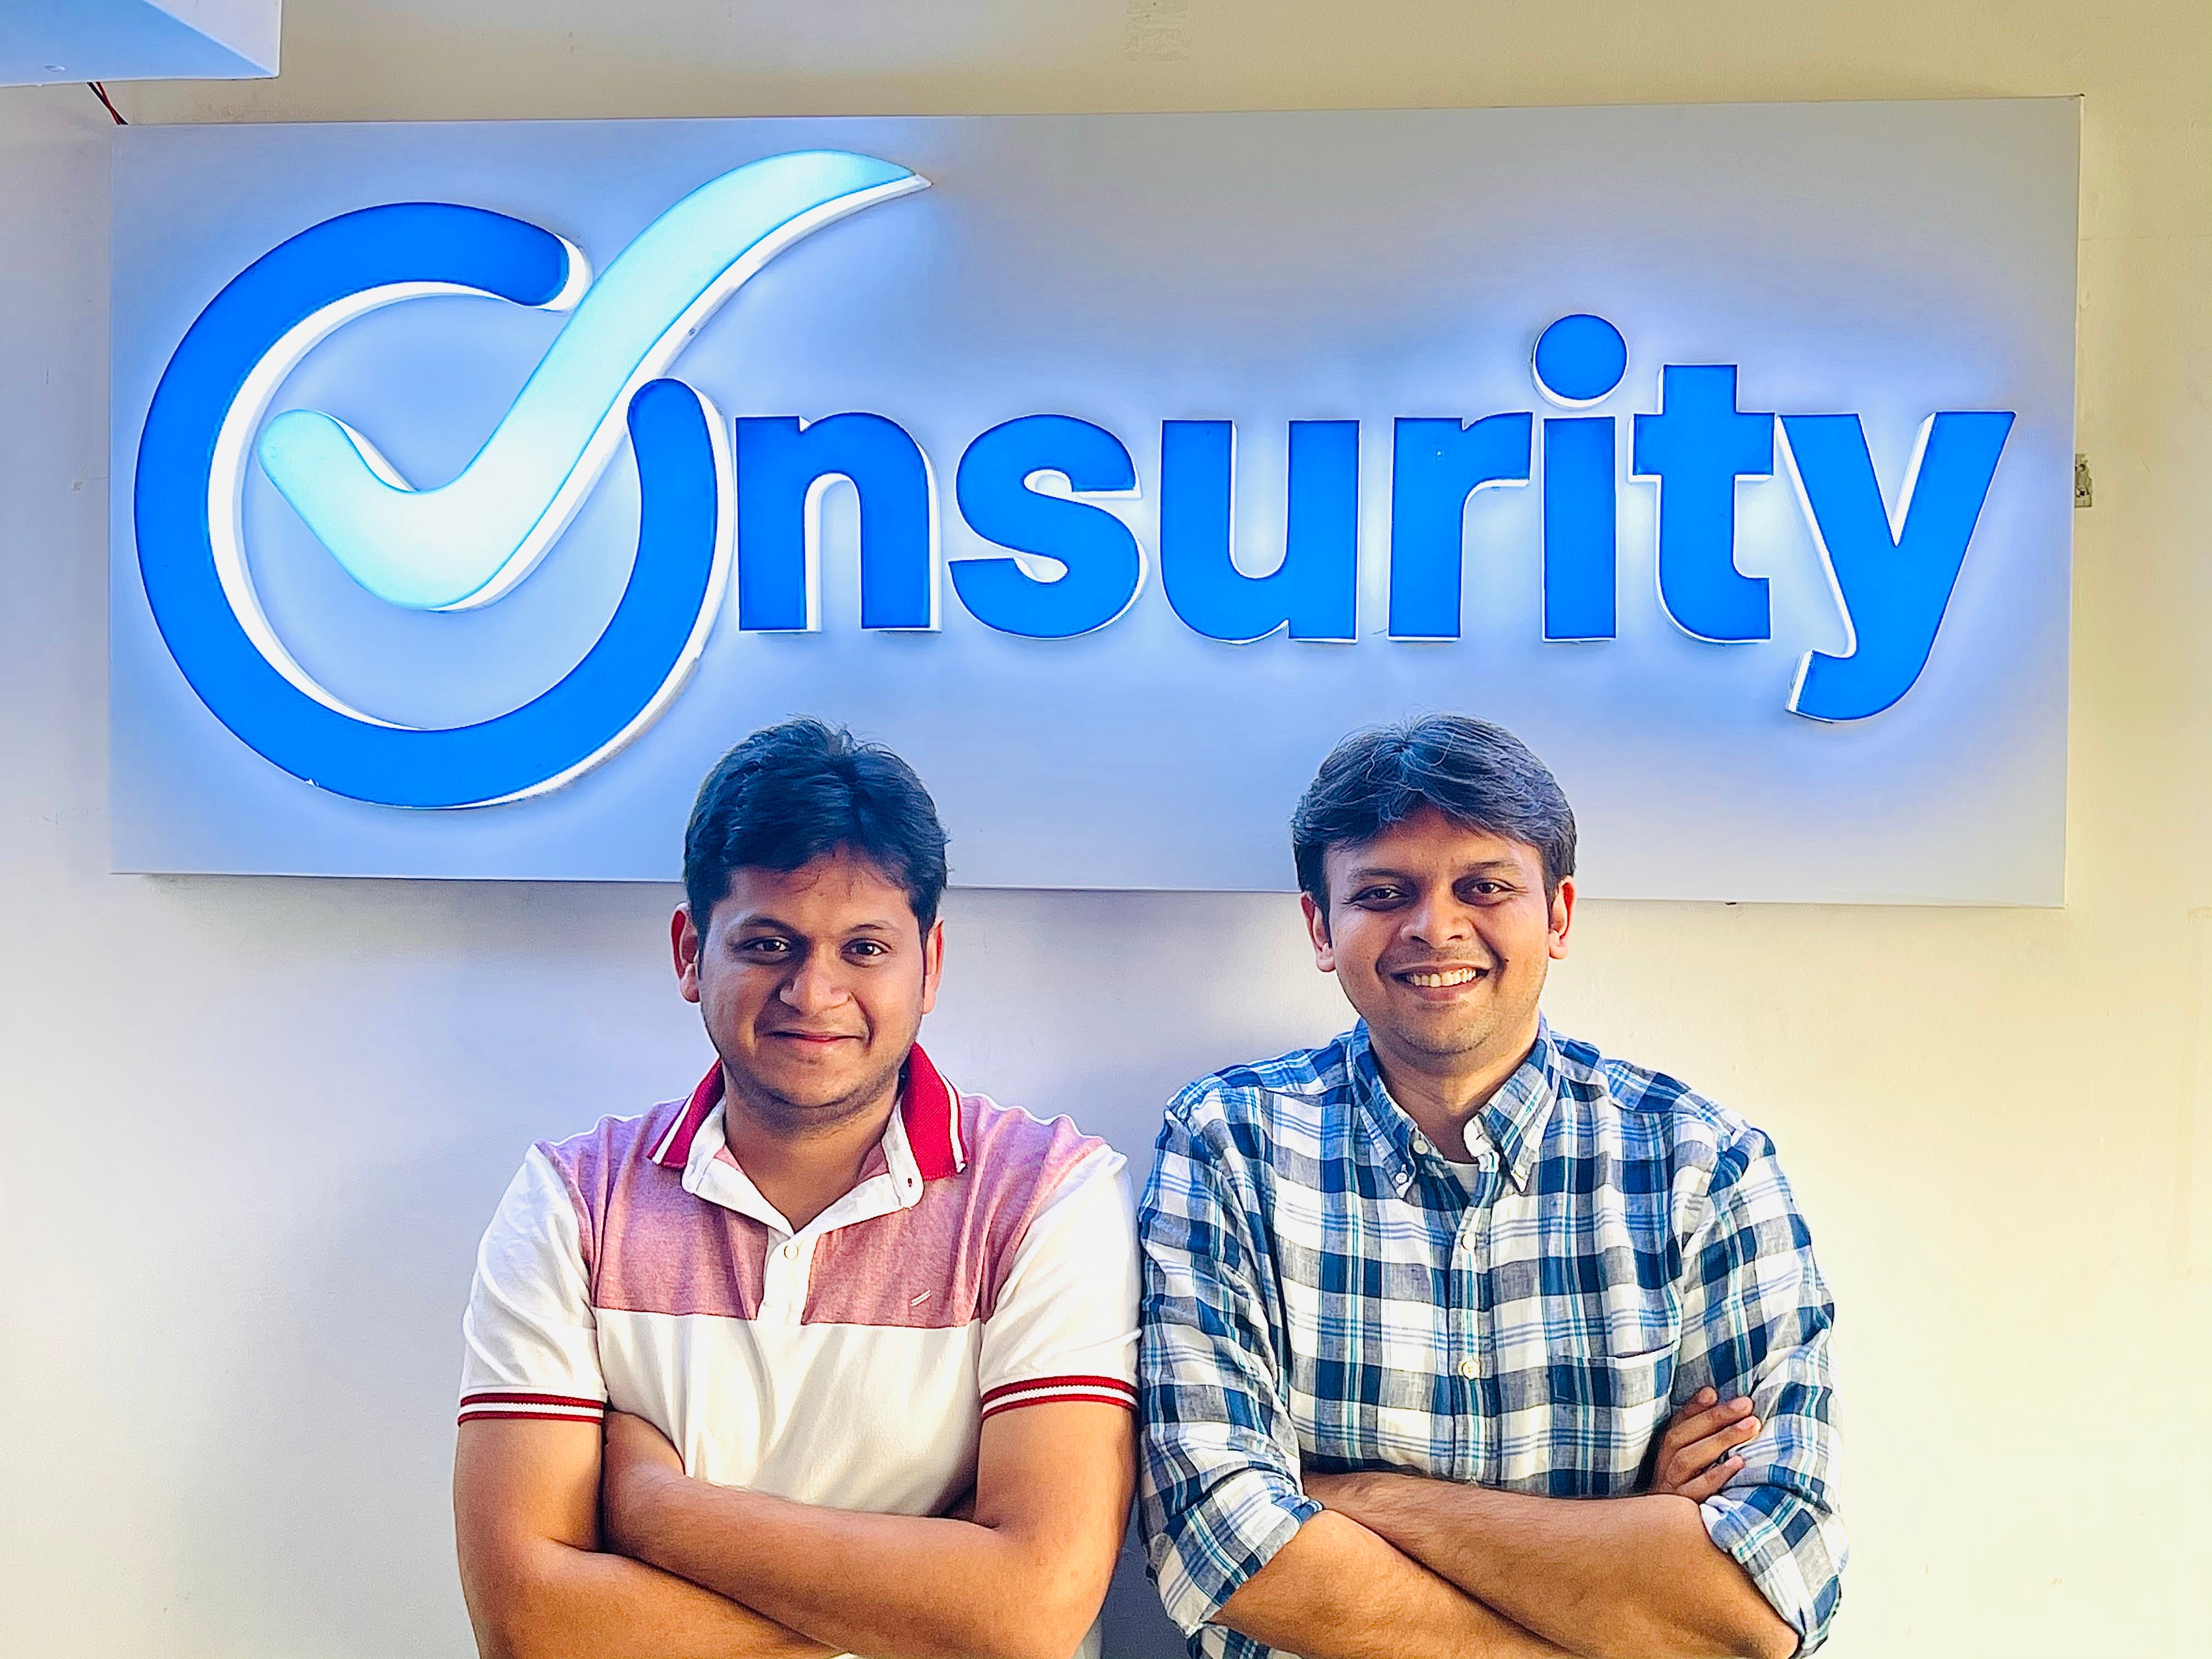 [Funding alert] Healthcare startup Onsurity raises $16M in Series A round